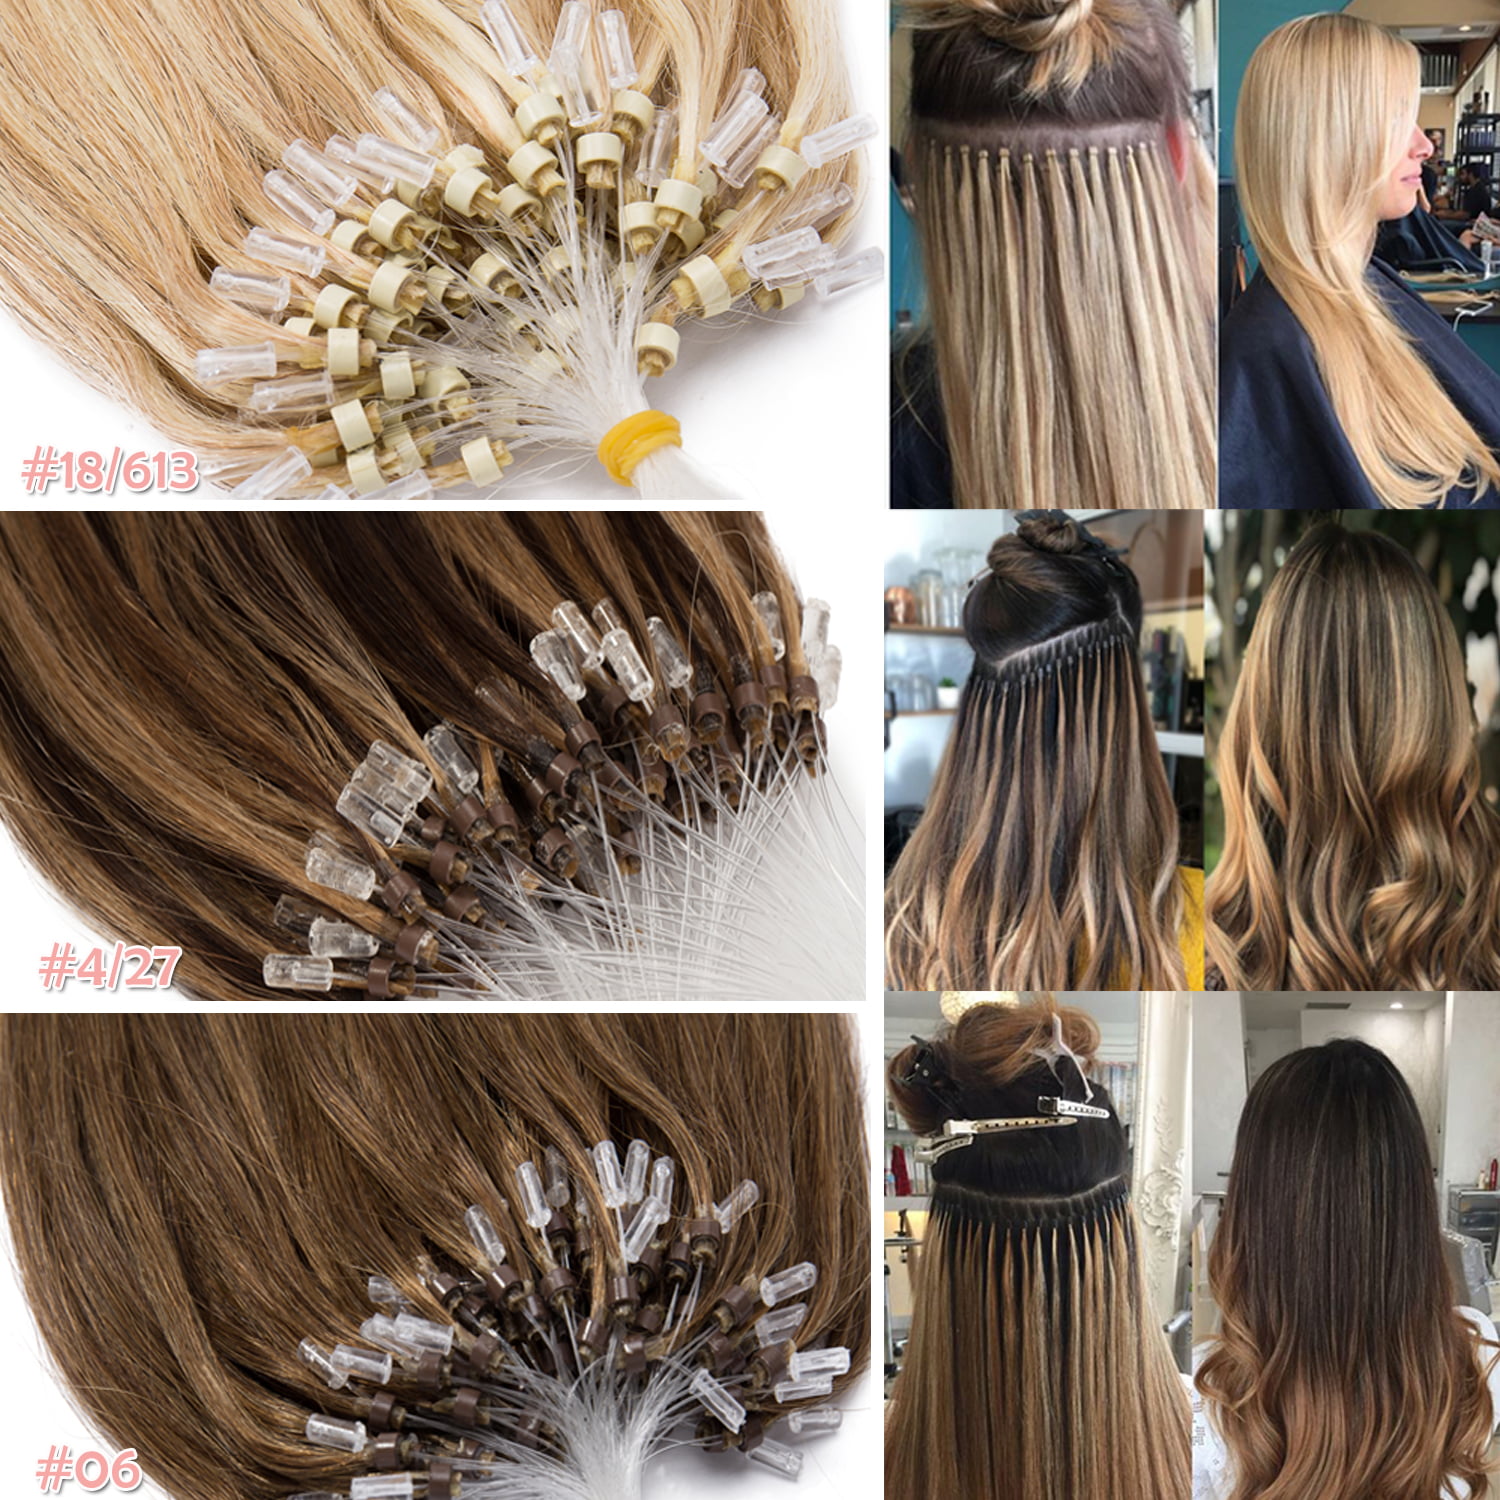 7 Ways To Extend the Life of Your Micro-ring Hair Extensions |  AmazingBeautyHair